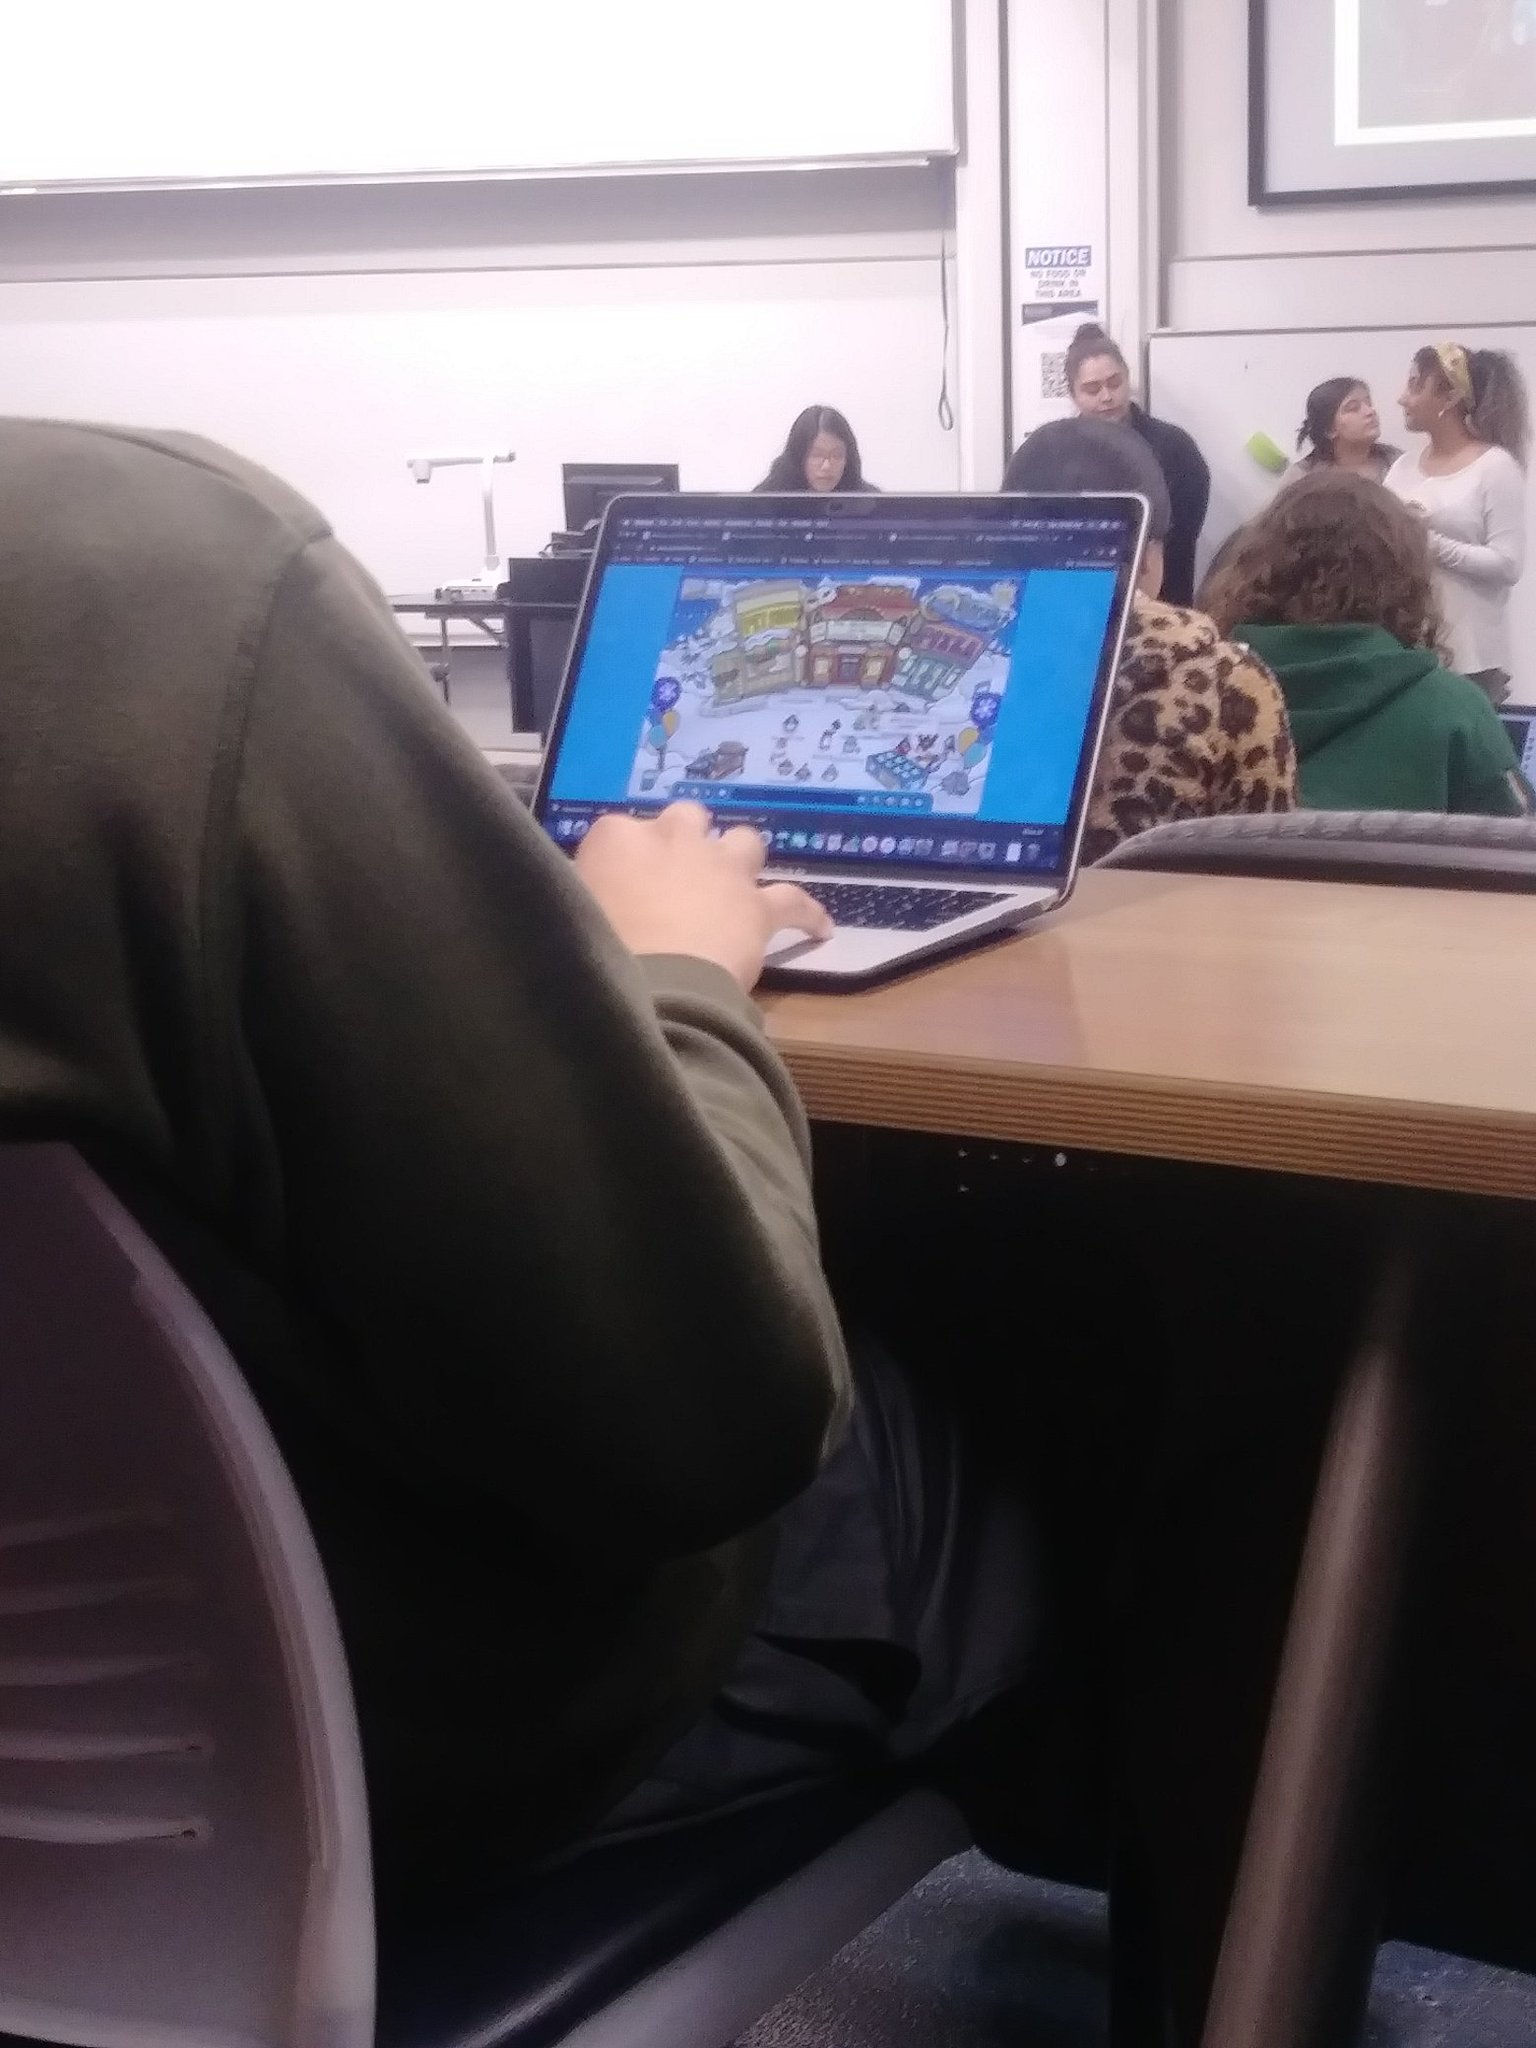 Was in class today, when this caught my eye - meme